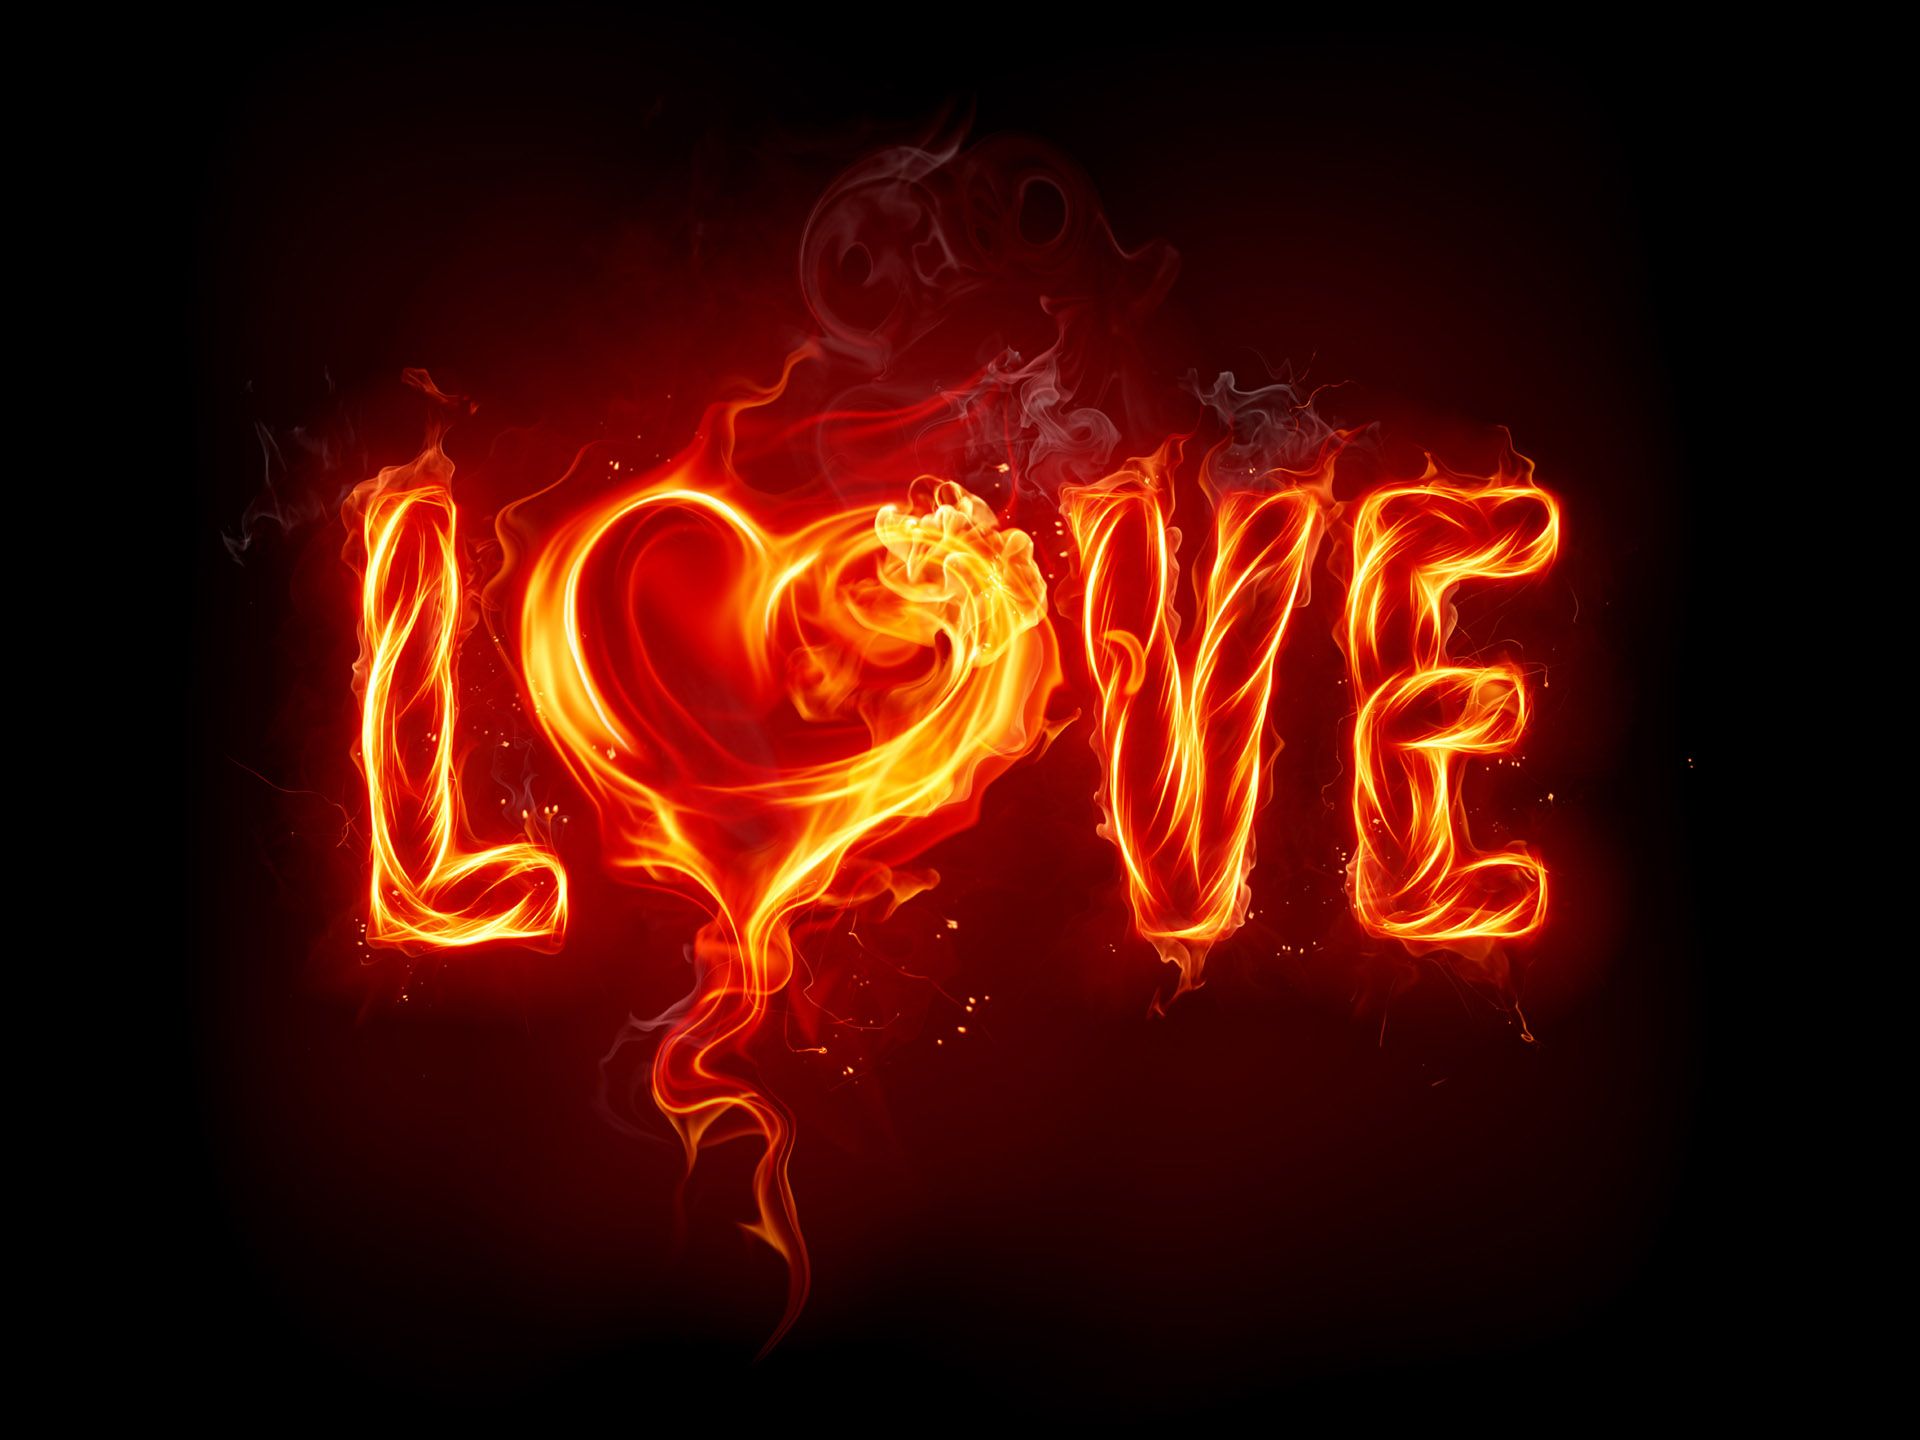 689 Love HD Wallpapers | Backgrounds - Wallpaper Abyss